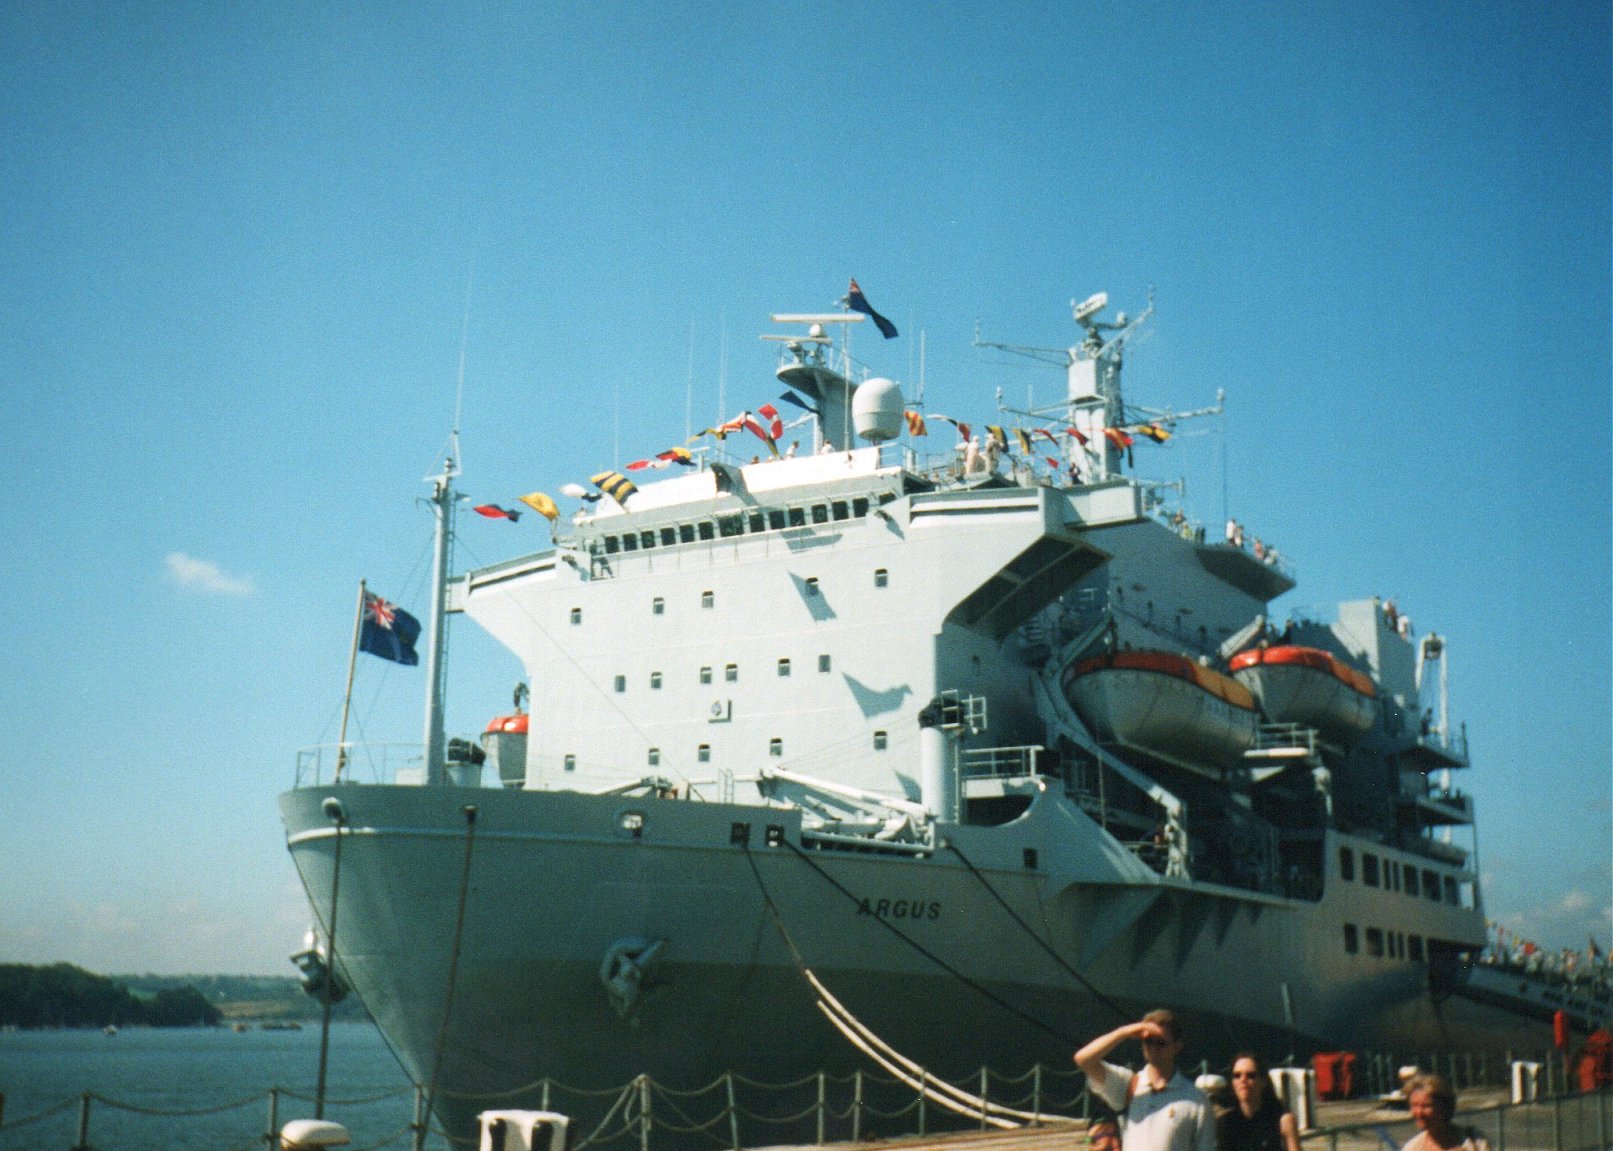 RFA Argus, primary casualty reception ship, Plymouth 1999.